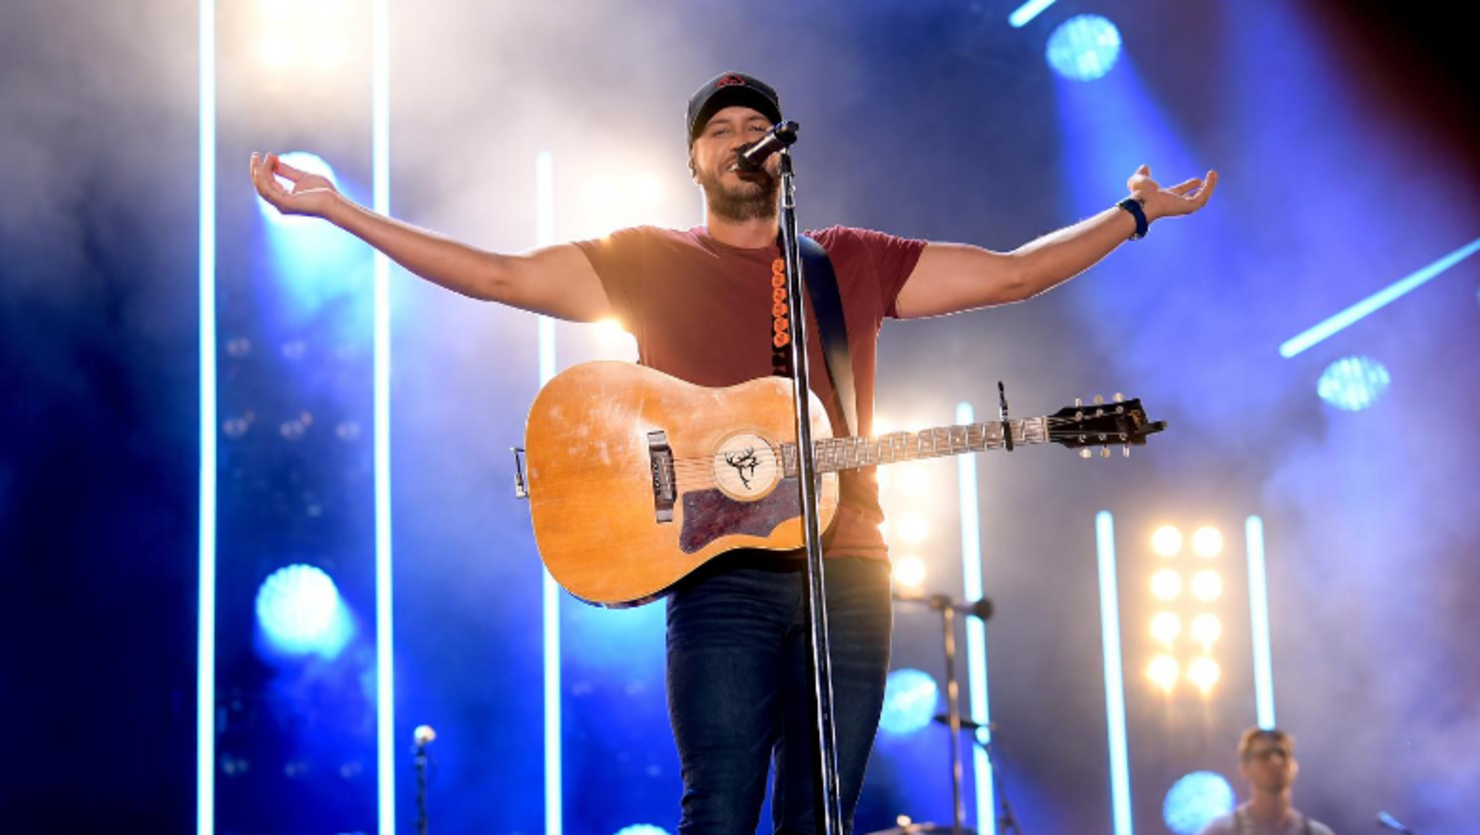 Luke Bryan On Why He Won't Perform Live Shows Yet Amid COVID-19